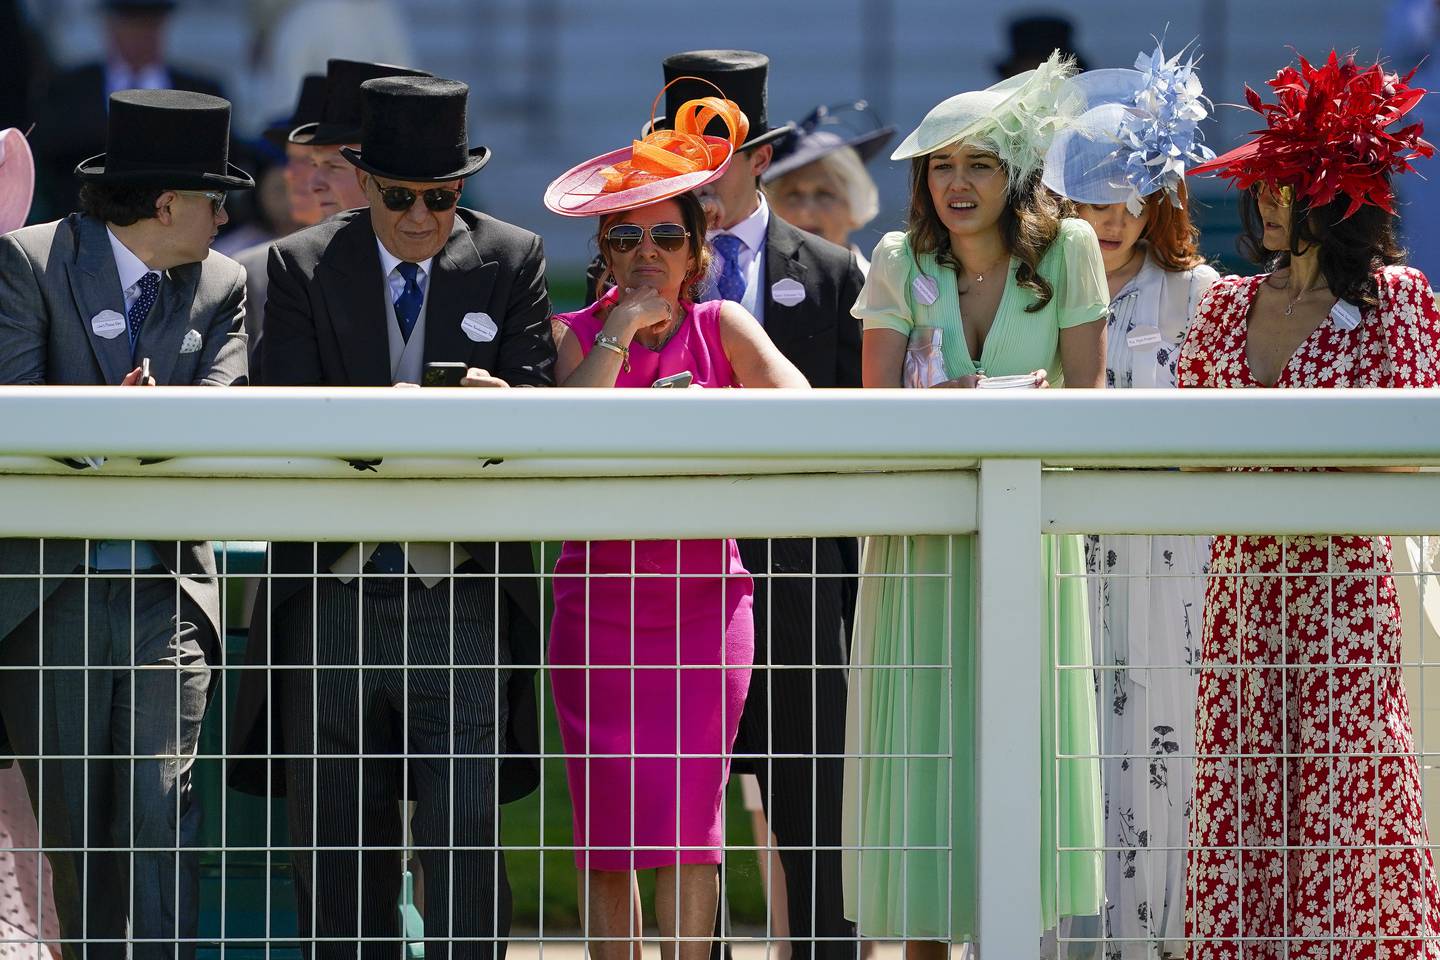 Racegoers wait for the royal procession at Royal Ascot 2022. Getty Images